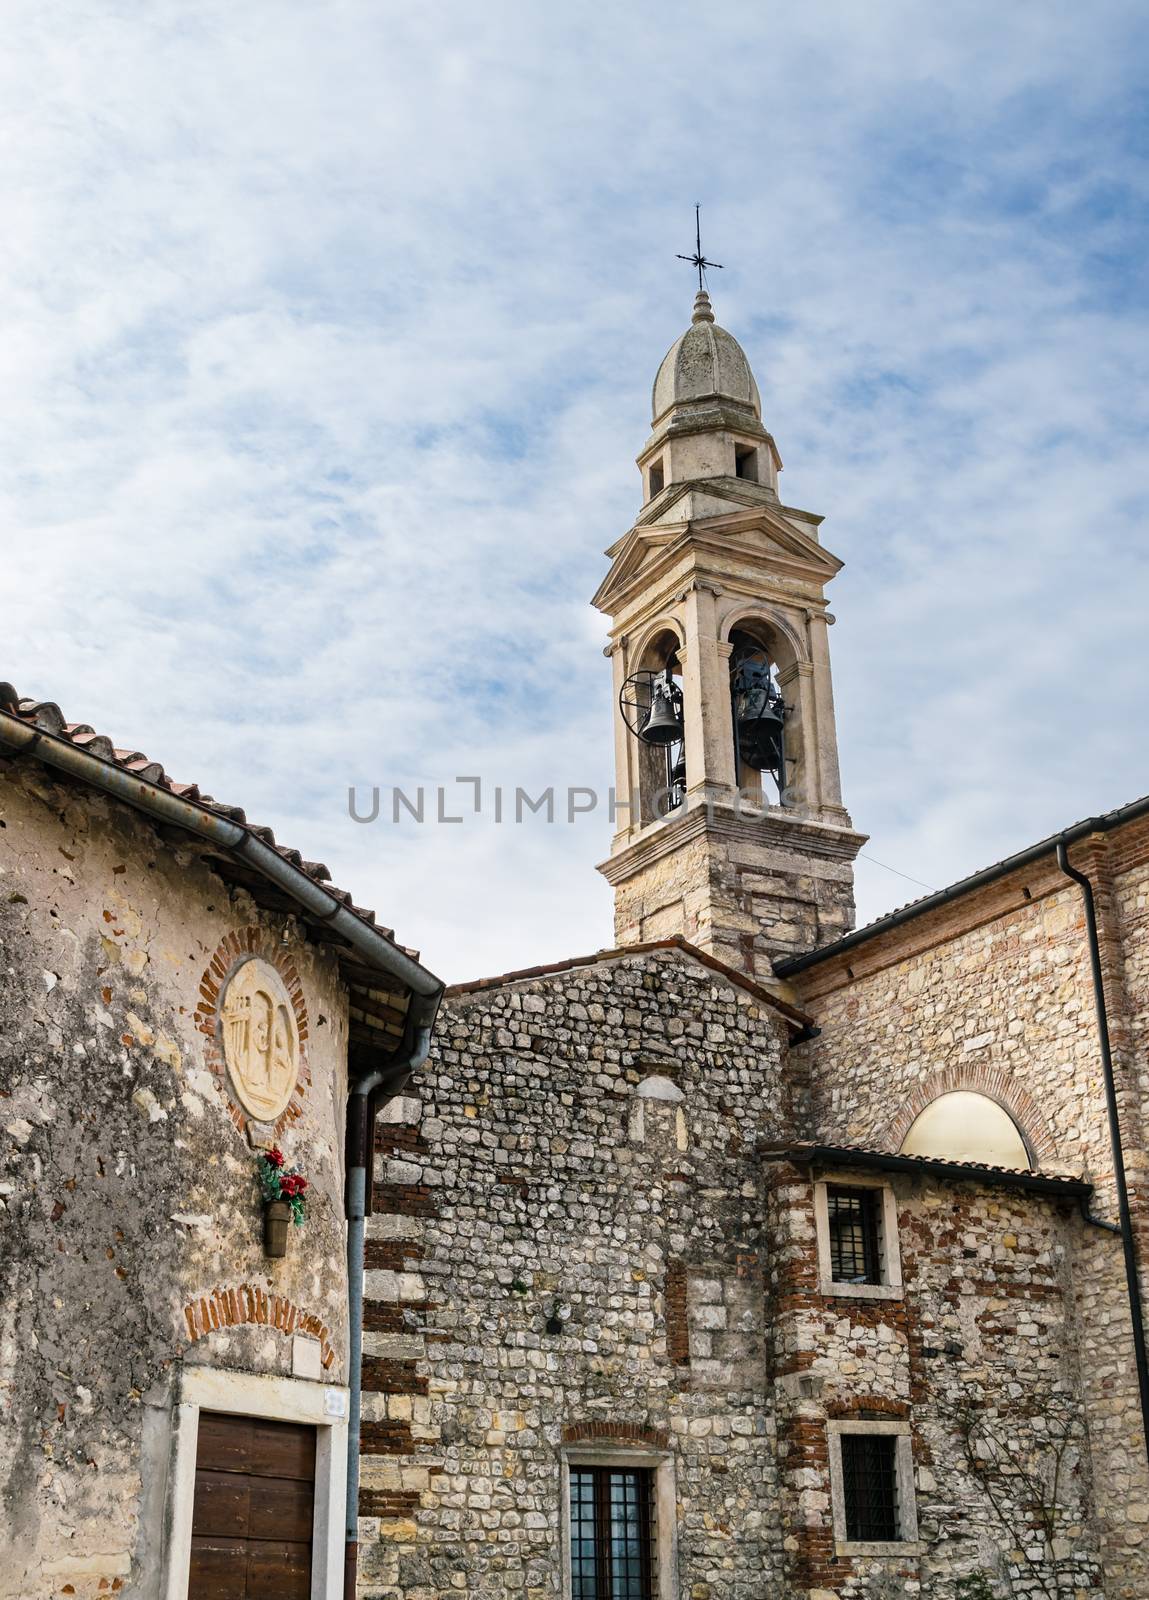 Bell tower of the medieval sanctuary of St. Mery of "Bassanella" in Soave, Italy.